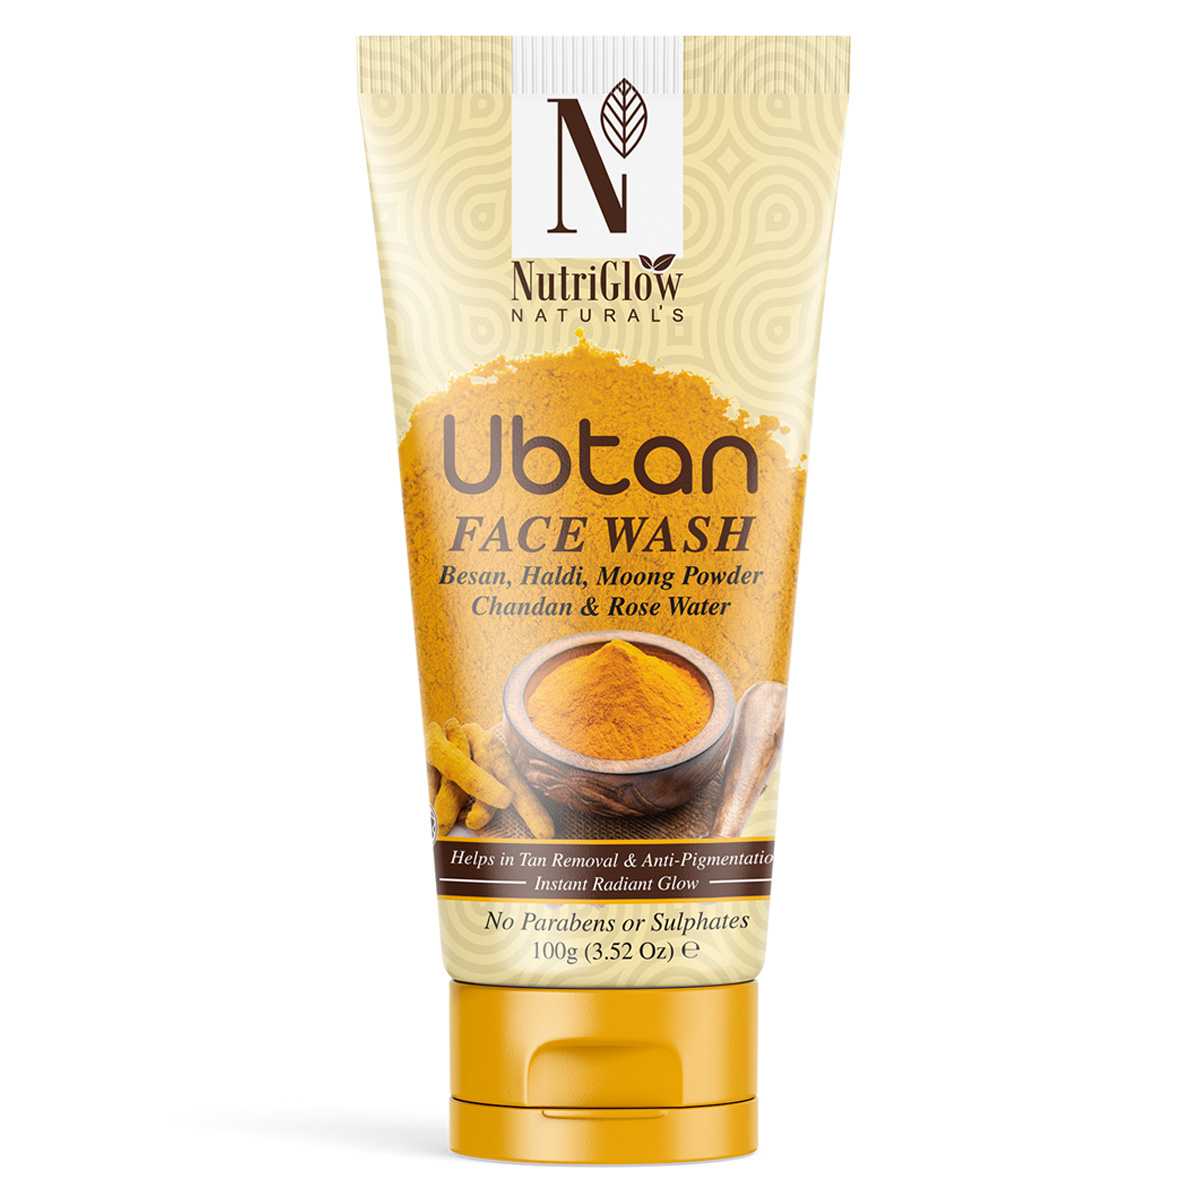 Nutriglow Natural’s Ubtan Face Wash With Haldi & Rose Water, 100gm